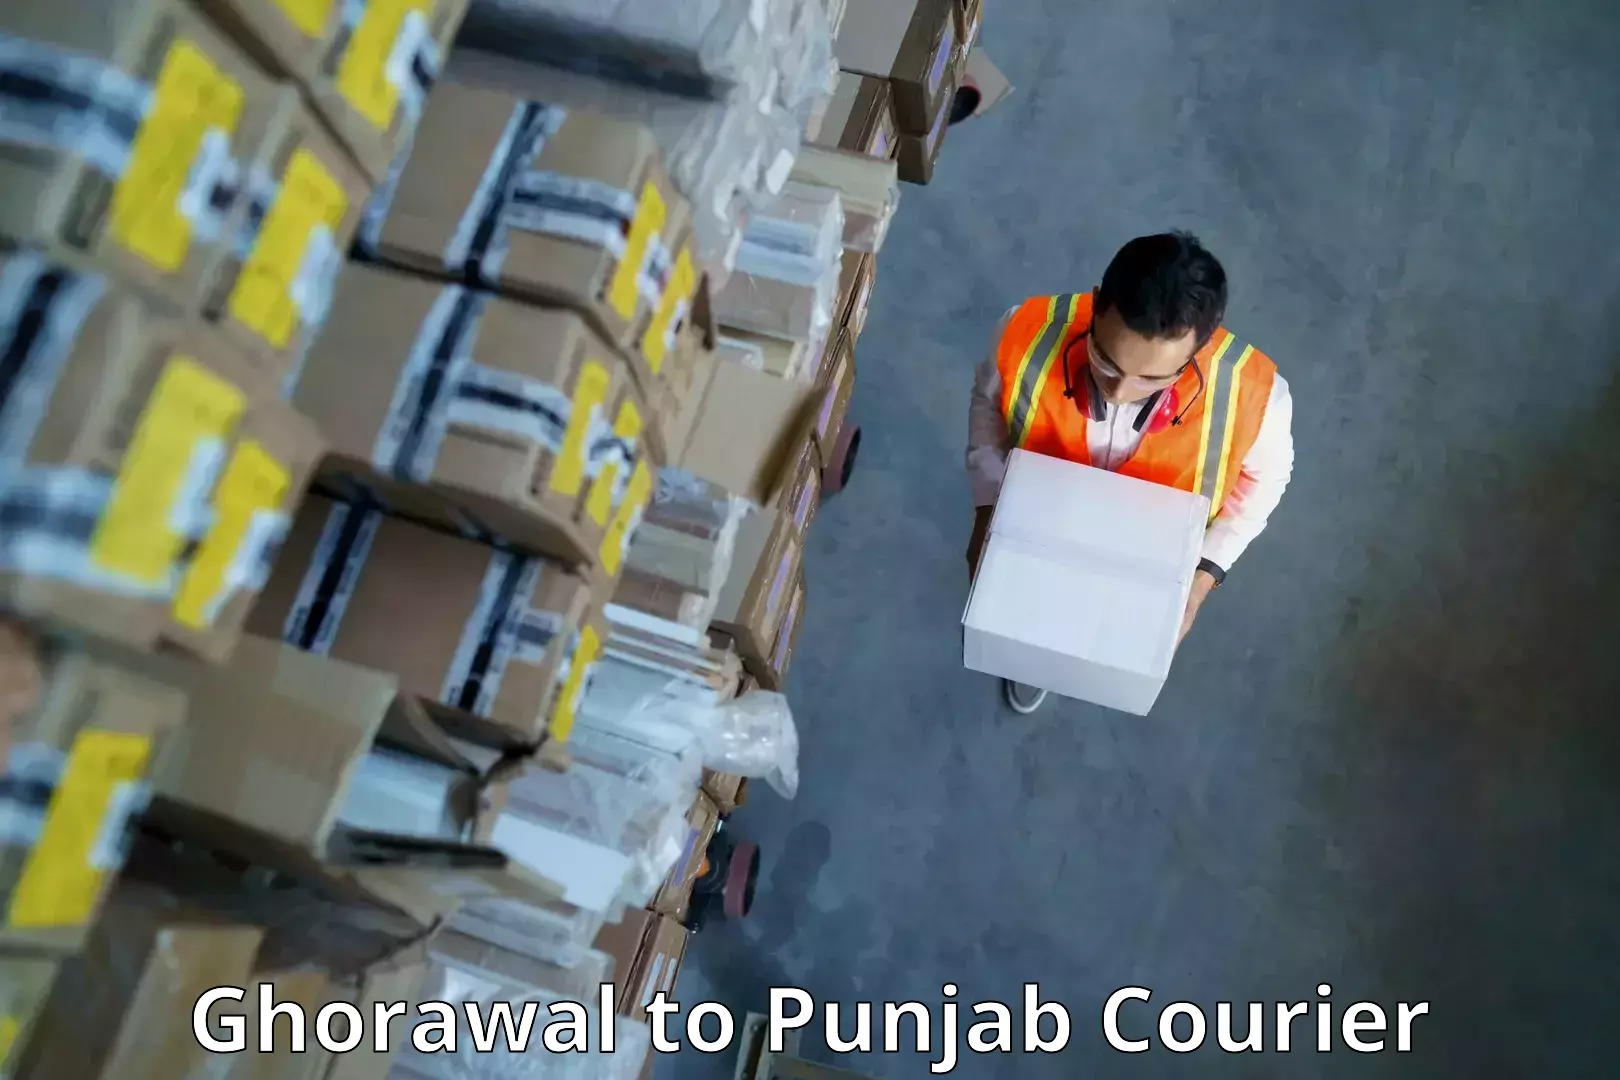 Dynamic courier operations in Ghorawal to Faridkot